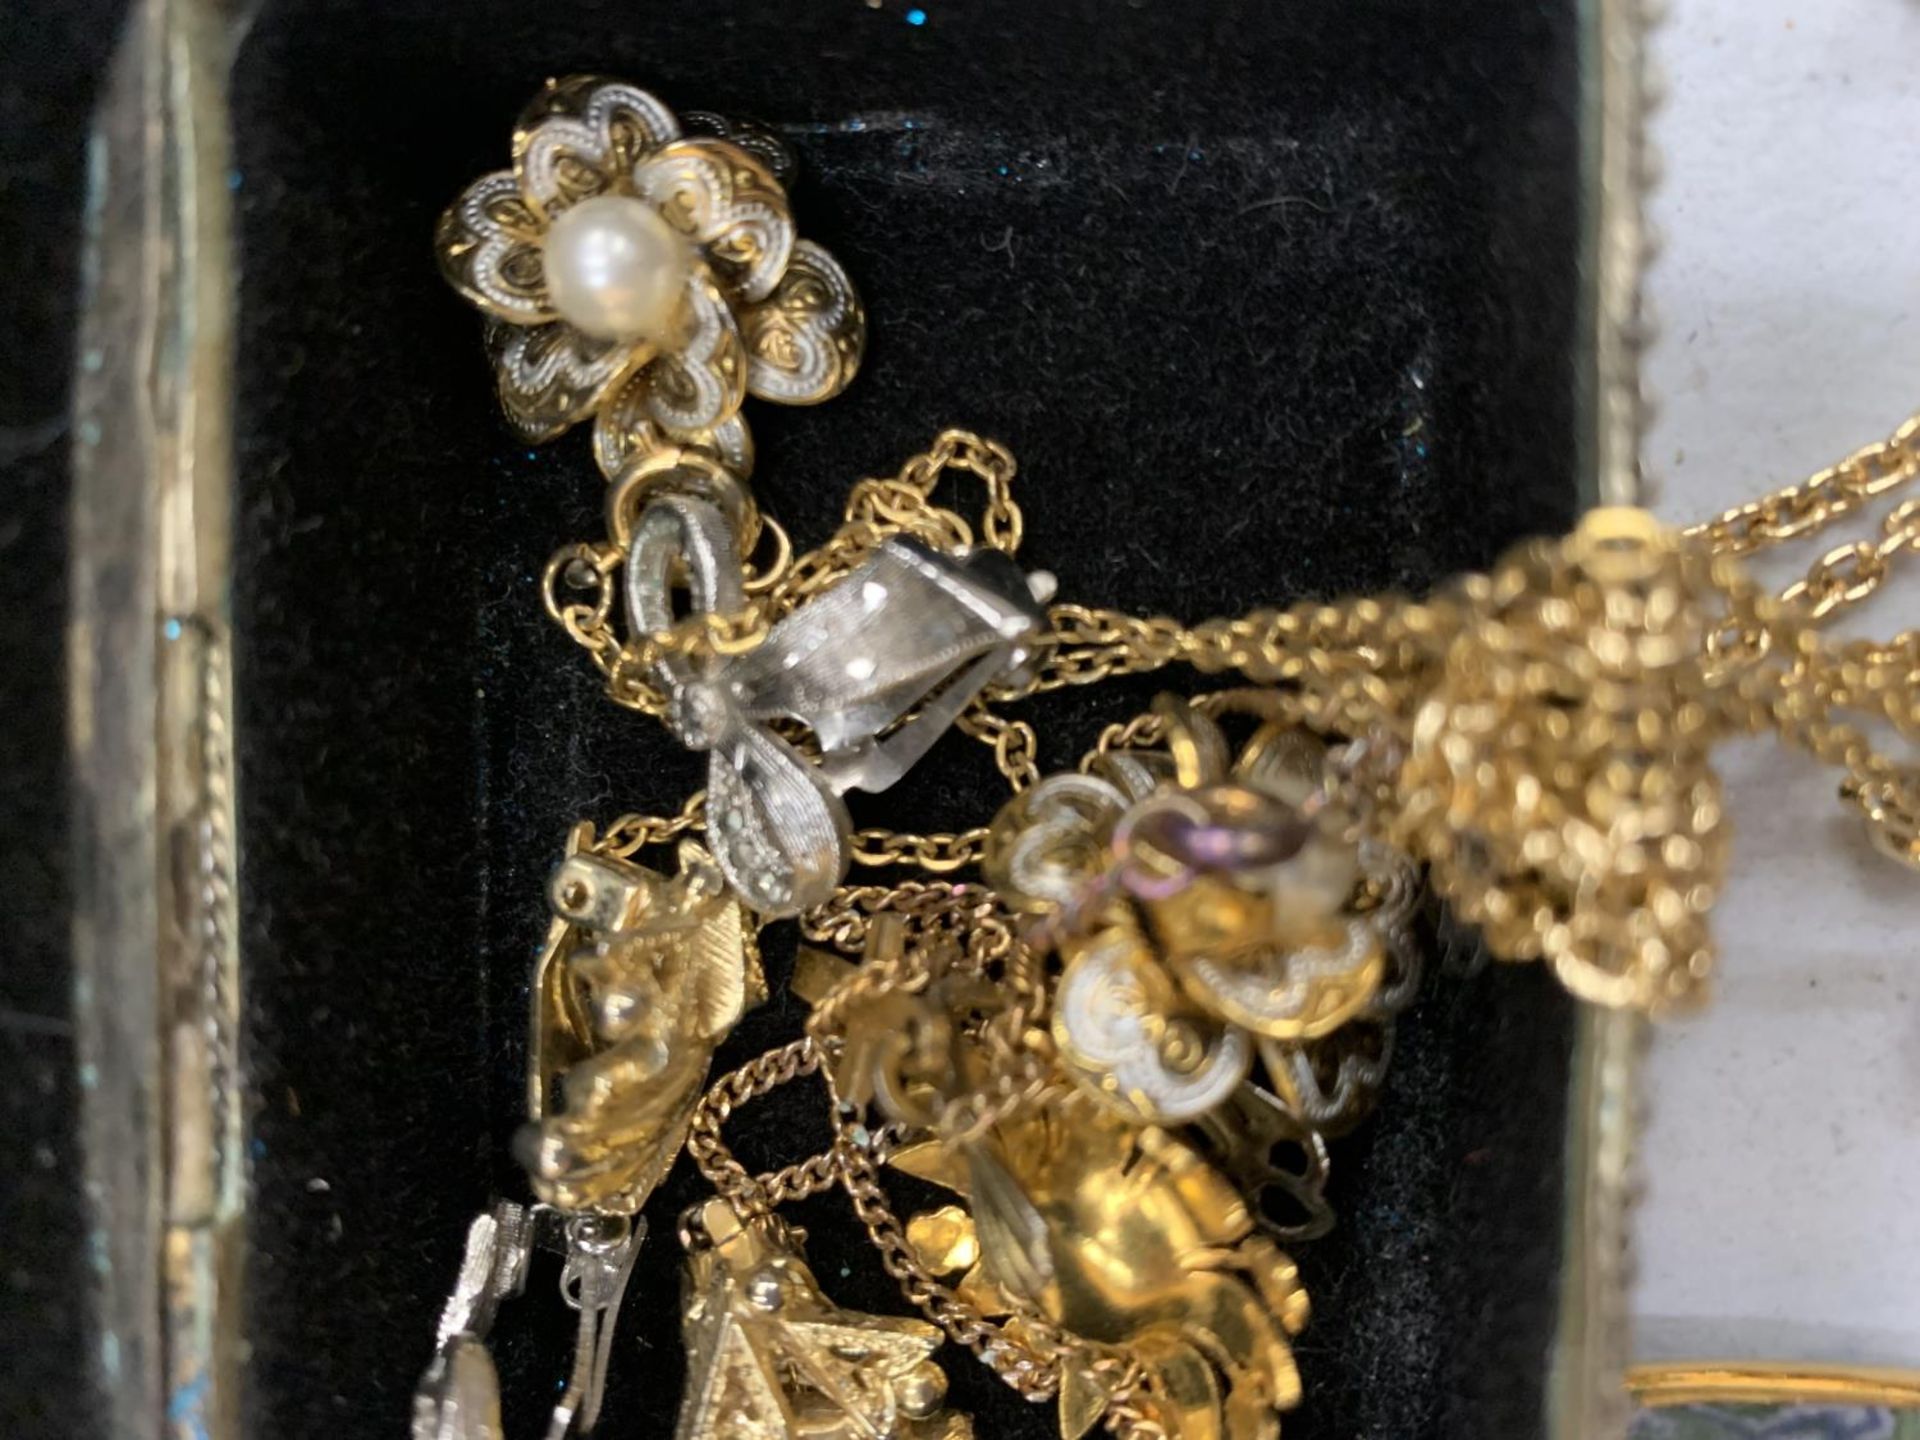 A SMALL ORNATE BOX WITH 'JEWEL' DECORATIONS CONTAINING A SMALL QUANTITY OF COSTUME JEWELLERY - Image 3 of 3